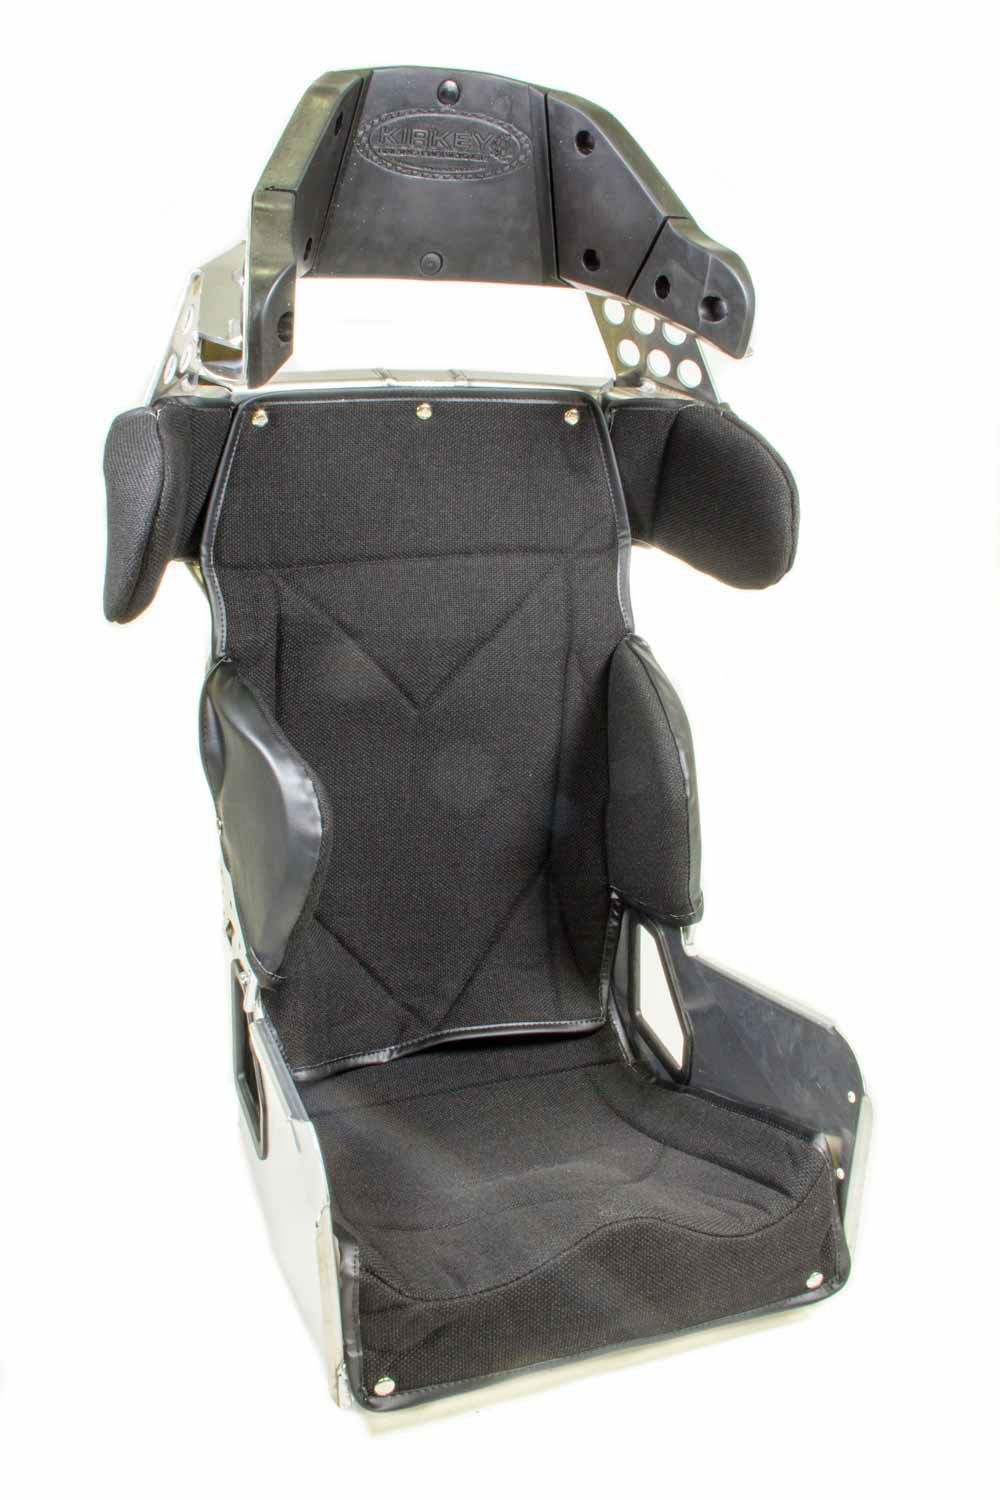 Kirkey Racing Seats 7017011 - Black Cloth Cover for 70700